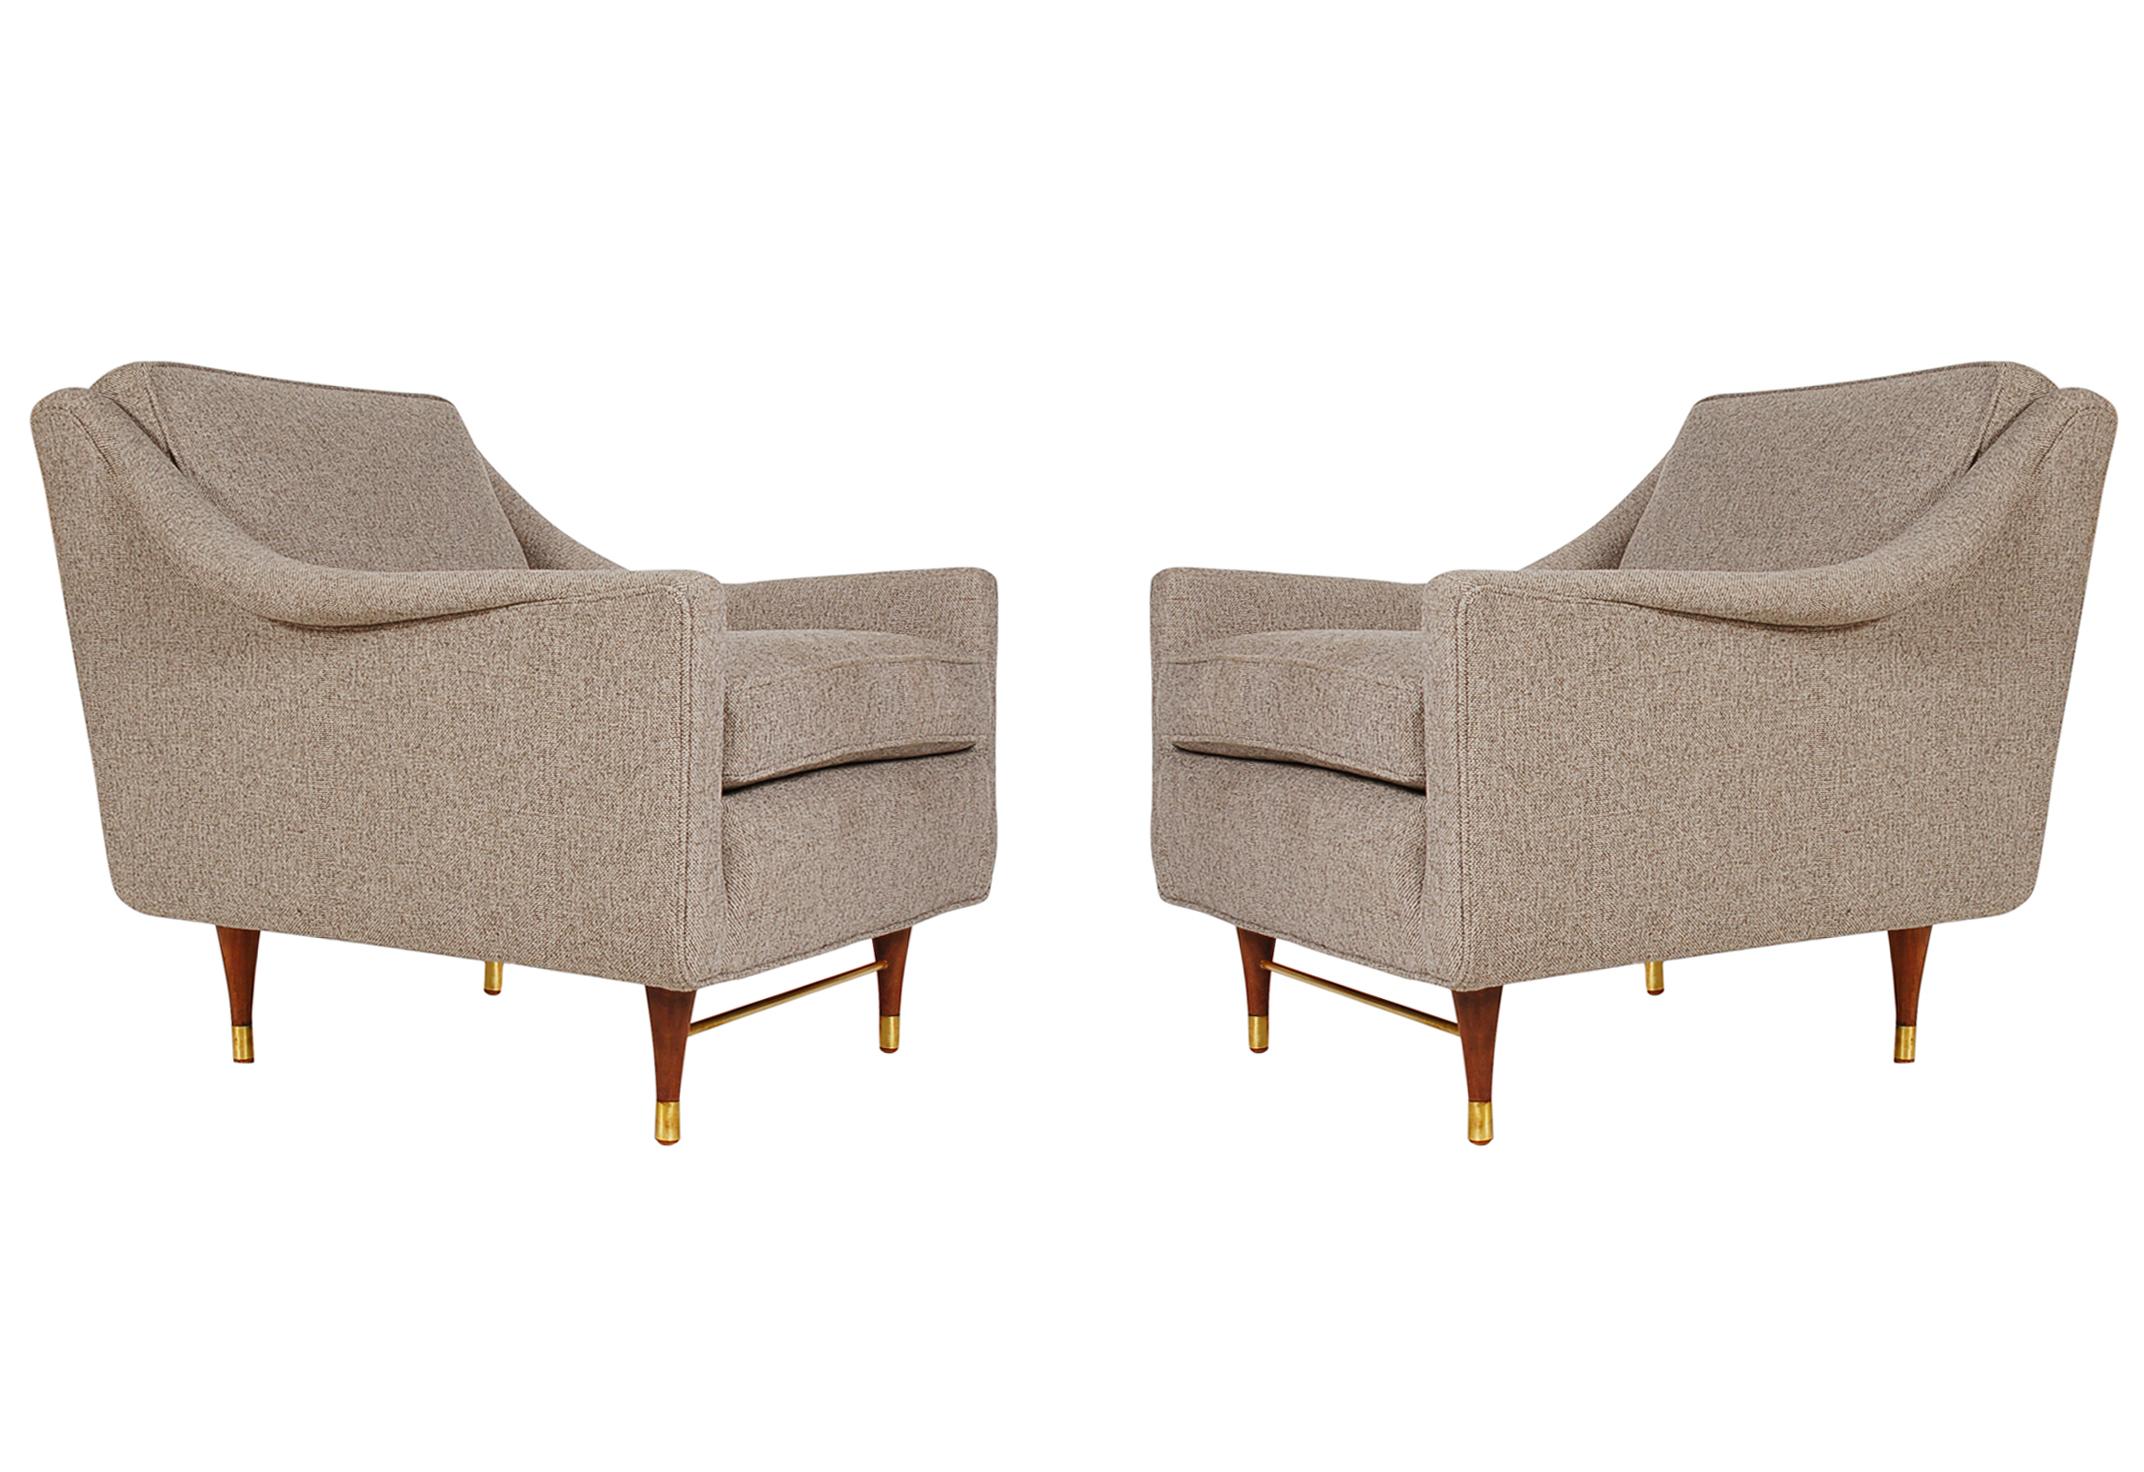 Mid-Century Modern Lounge or Club Chairs After Edward Wormley for Dunbar 3